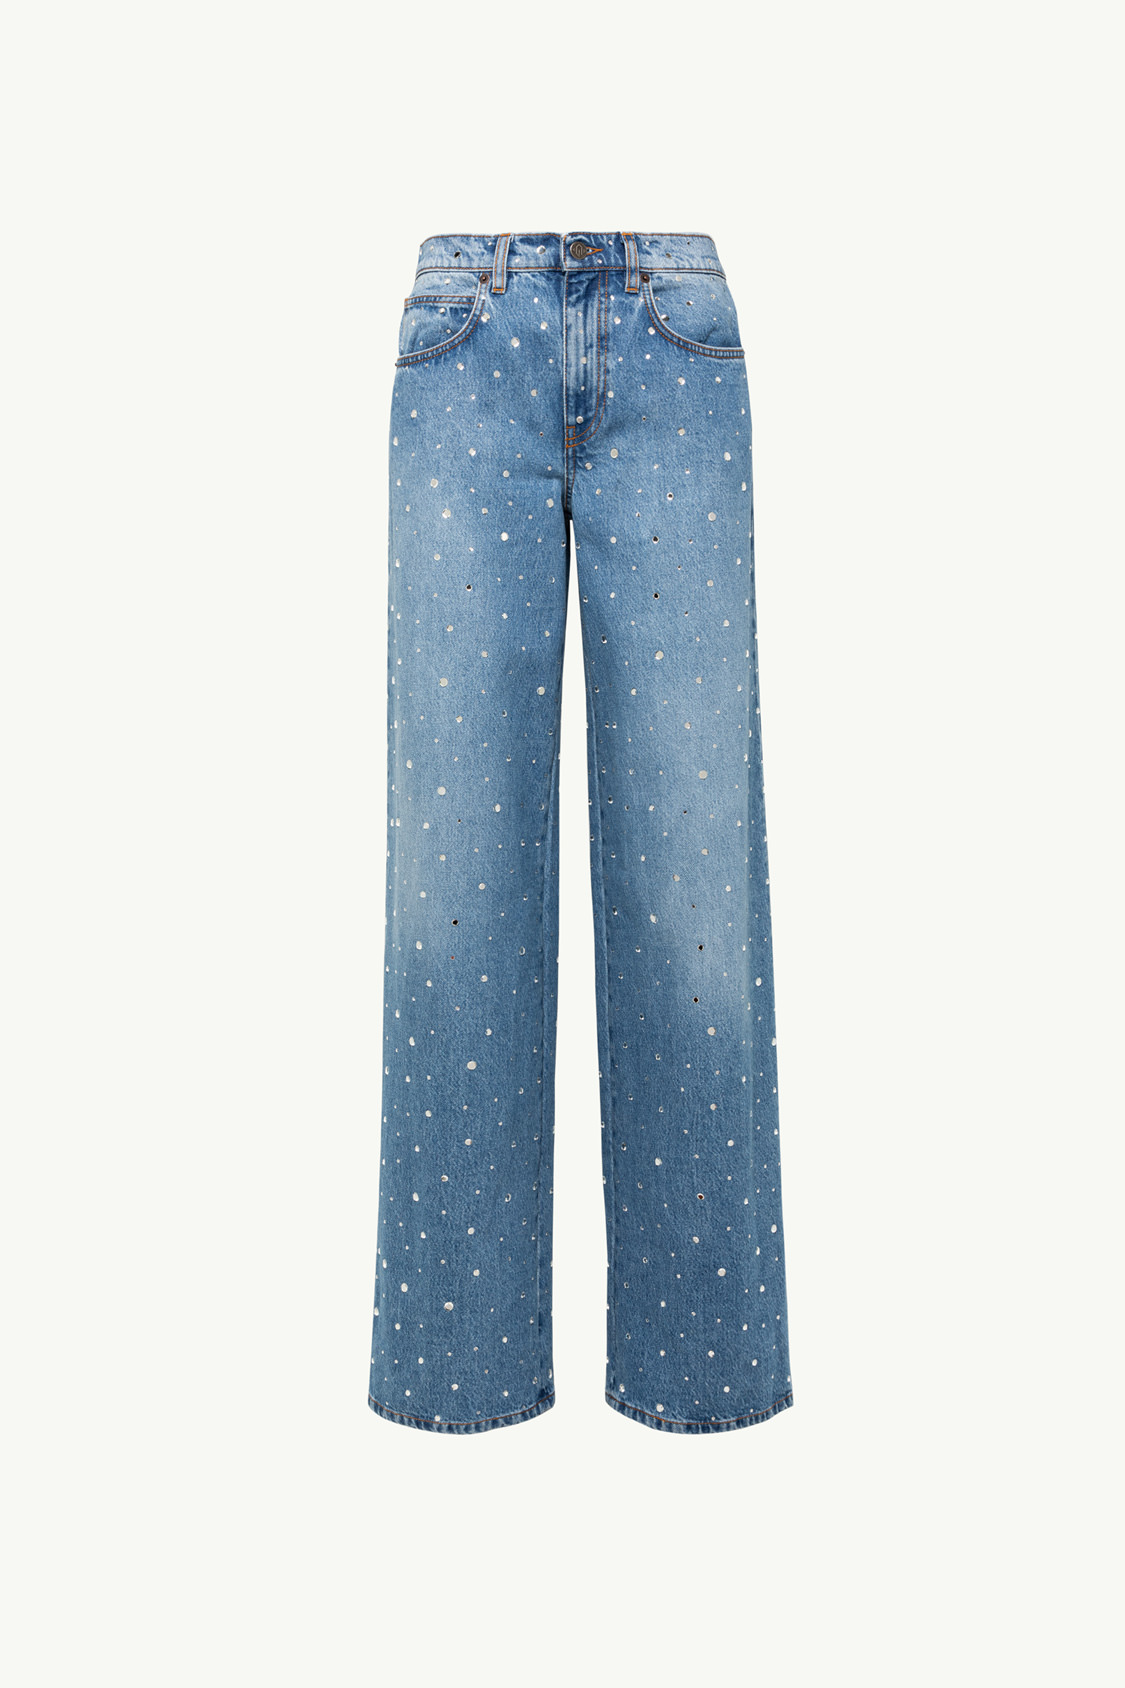 5-POCKET JEANS WITH MIRROR DETAILING